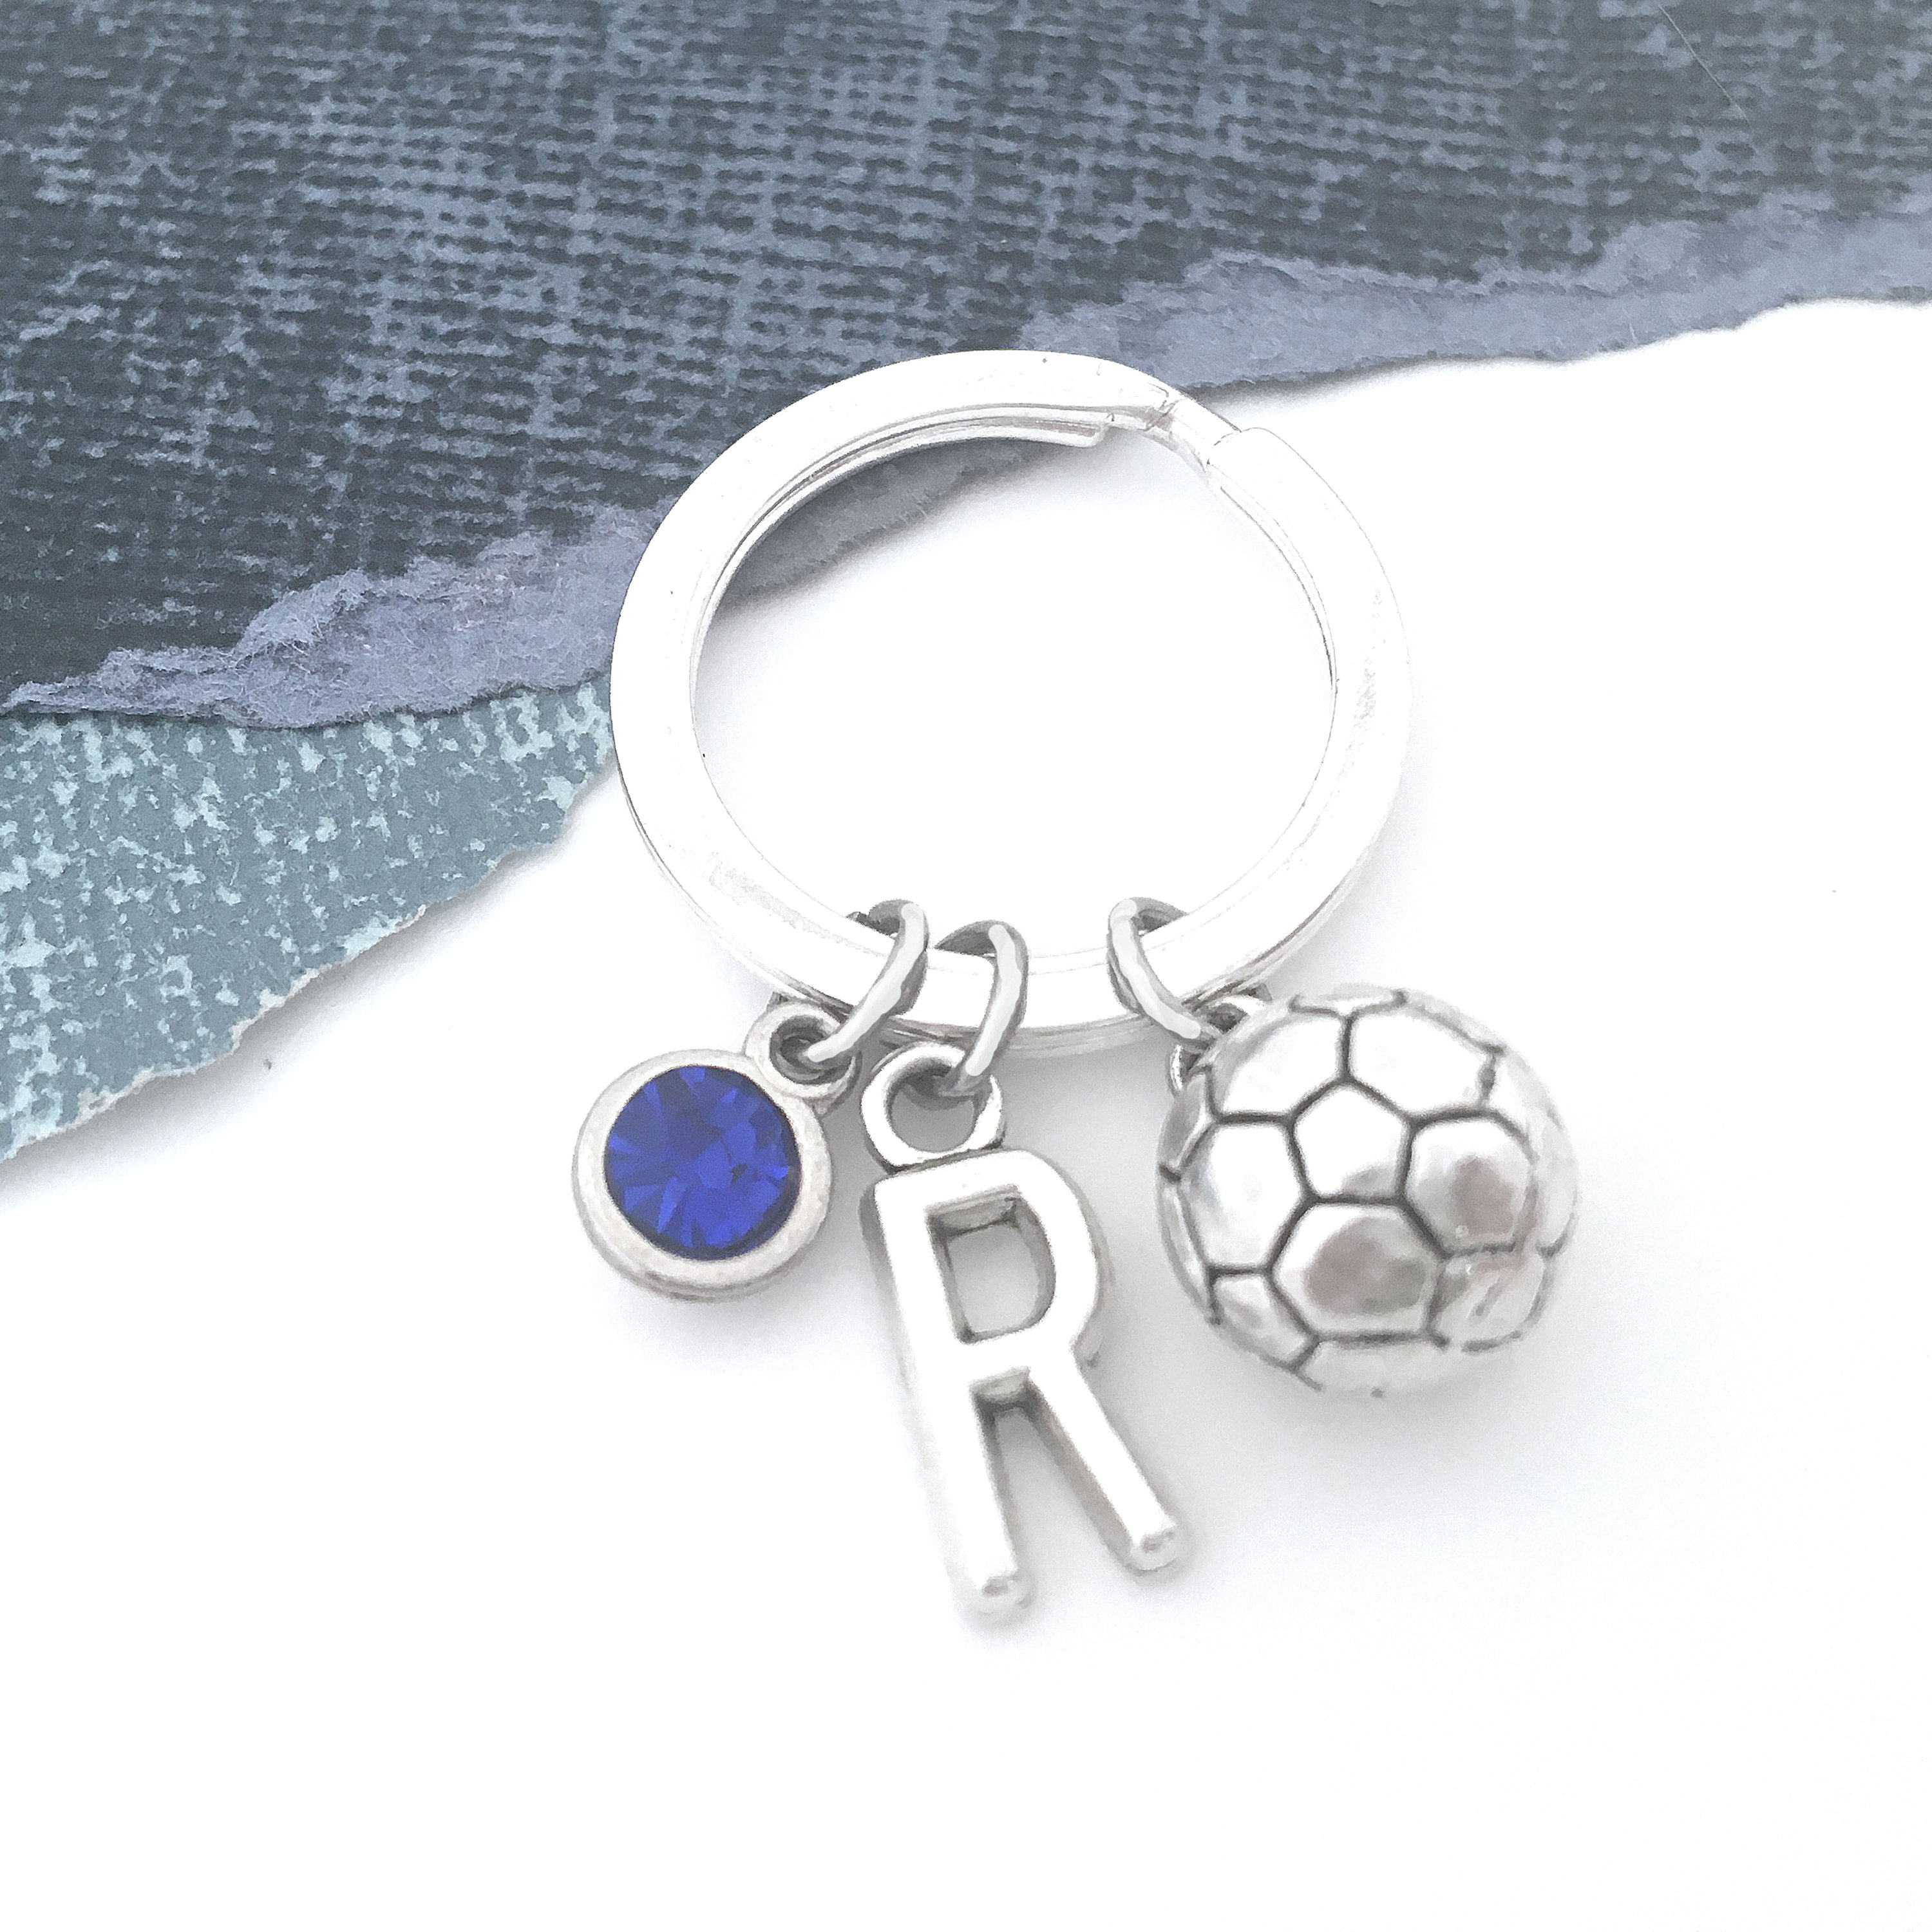 Personalized Soccer-Themed Keychains